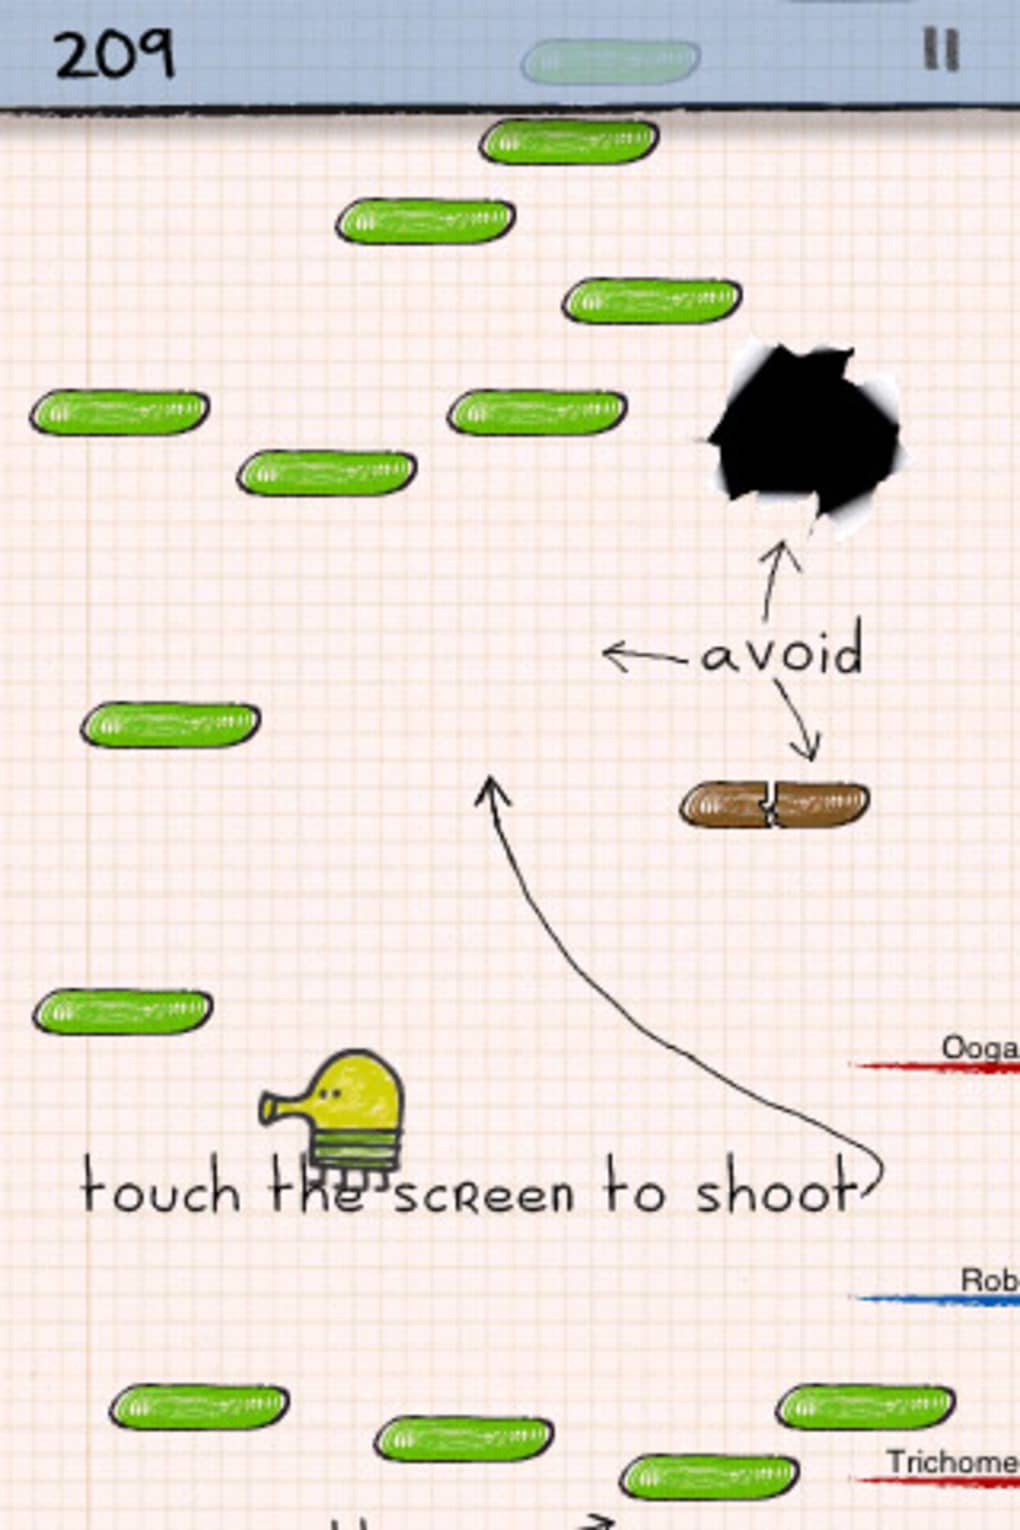 Doodle Jump 2 (by Lima Sky) IOS Gameplay Video (HD) 